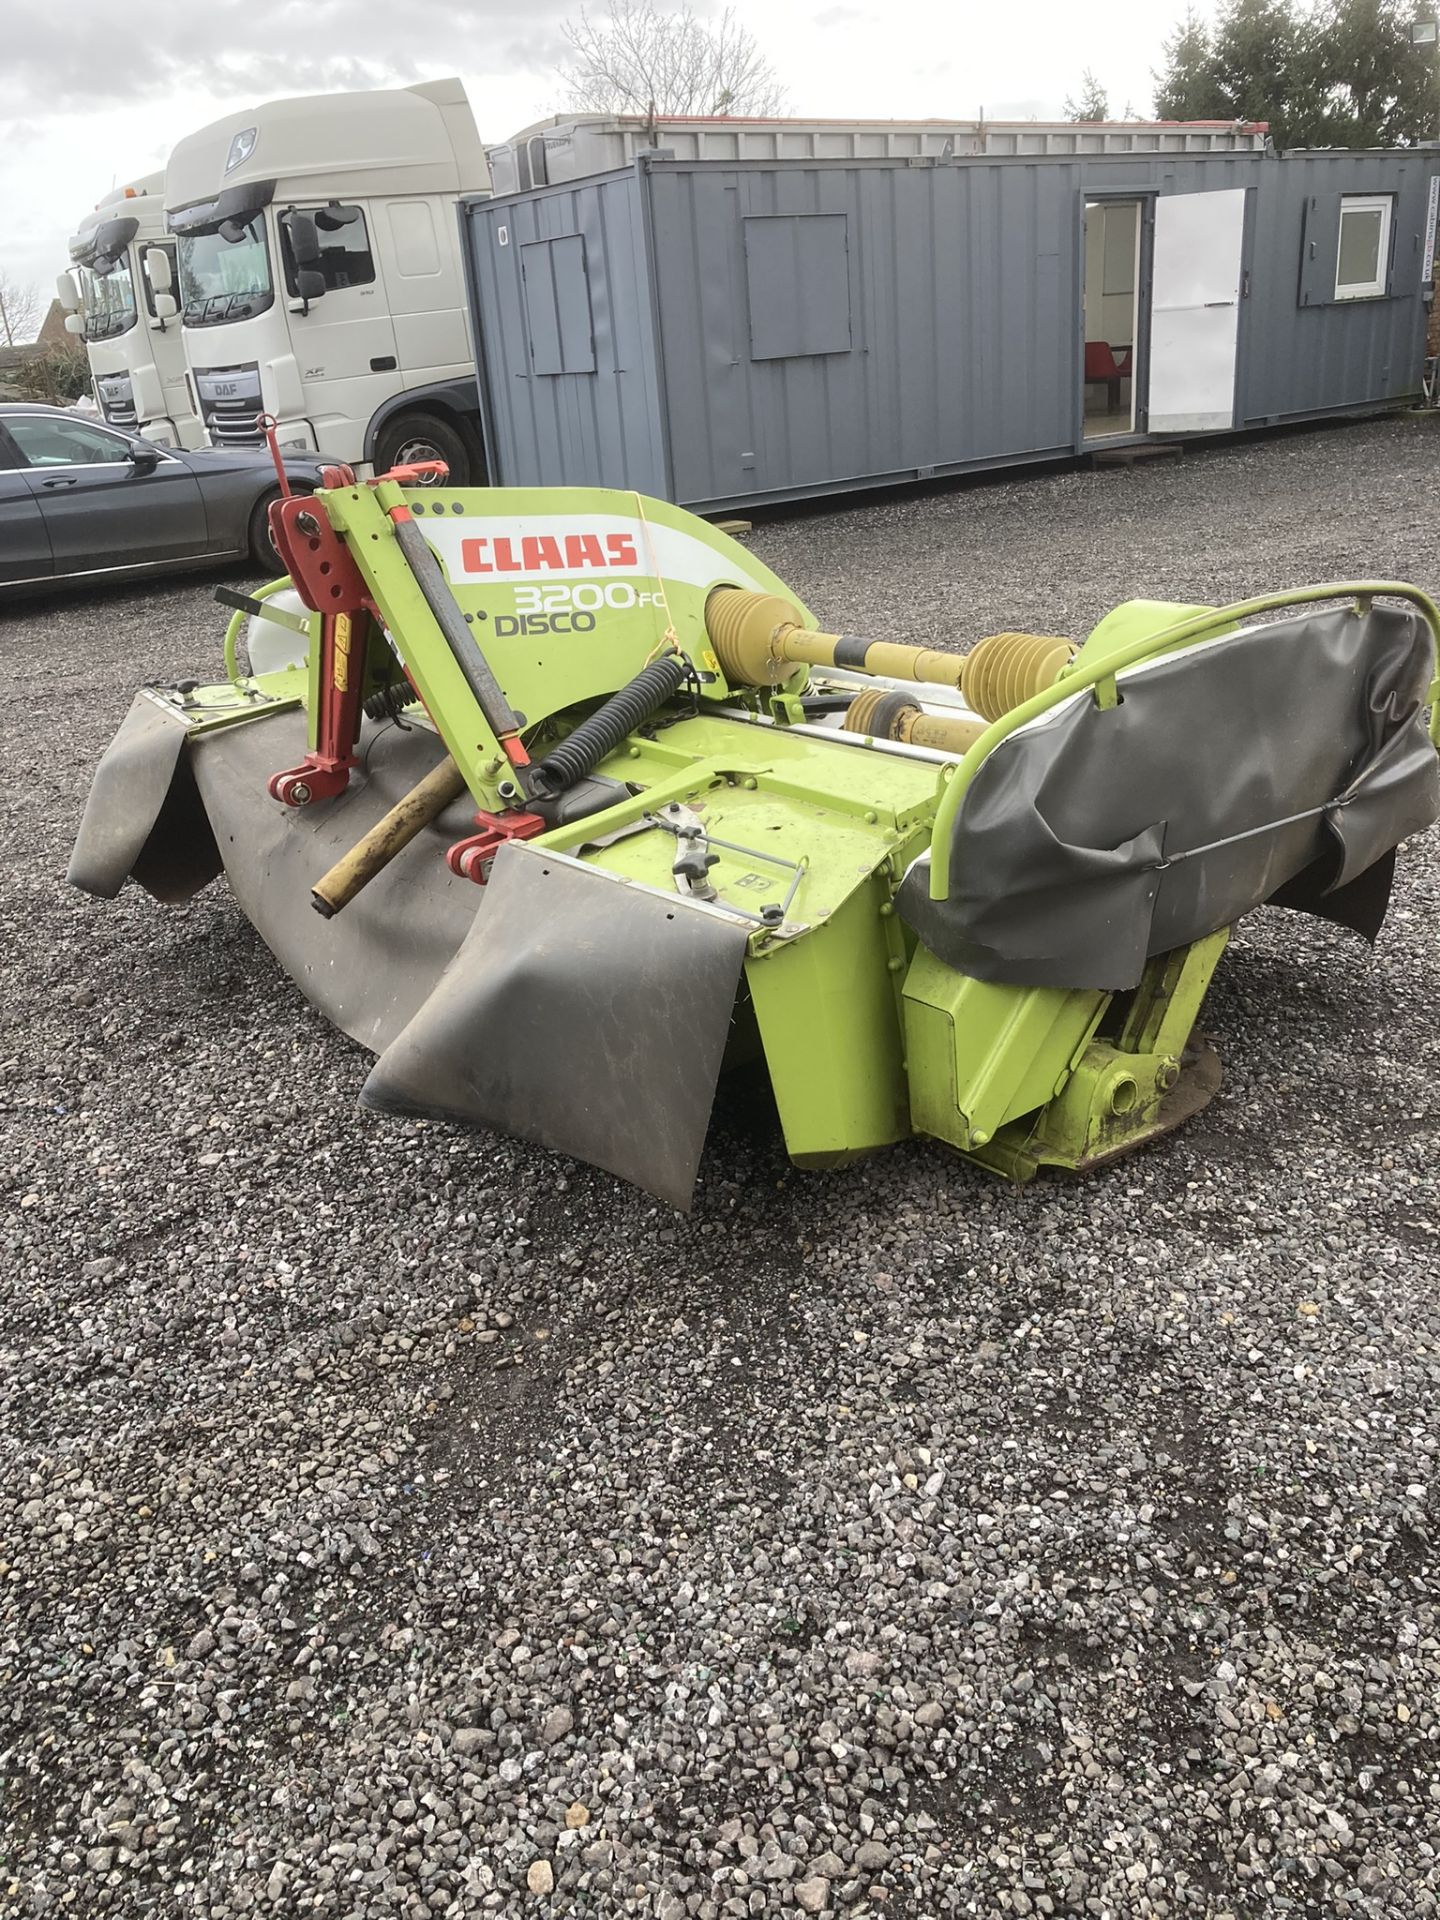 2017 Claas 3200FC Disco Profil Type SCHLEPPERDRELECK Front Mower Conditioner, S/No. 77875518, - Image 2 of 6